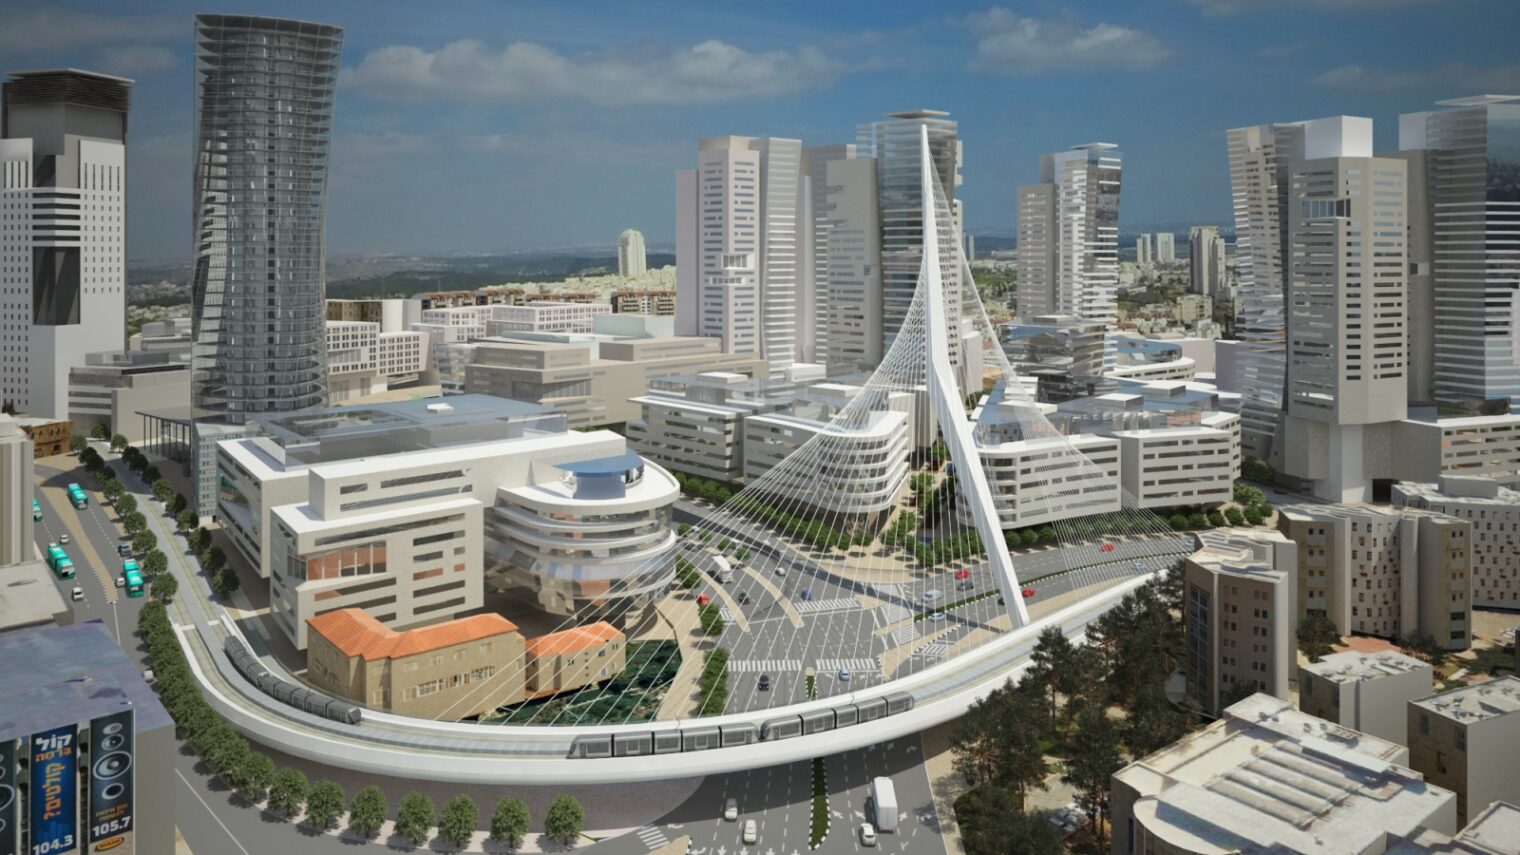 Architect’s rendering of the Jerusalem Gateway complex. Image courtesy of Dagan Solutions